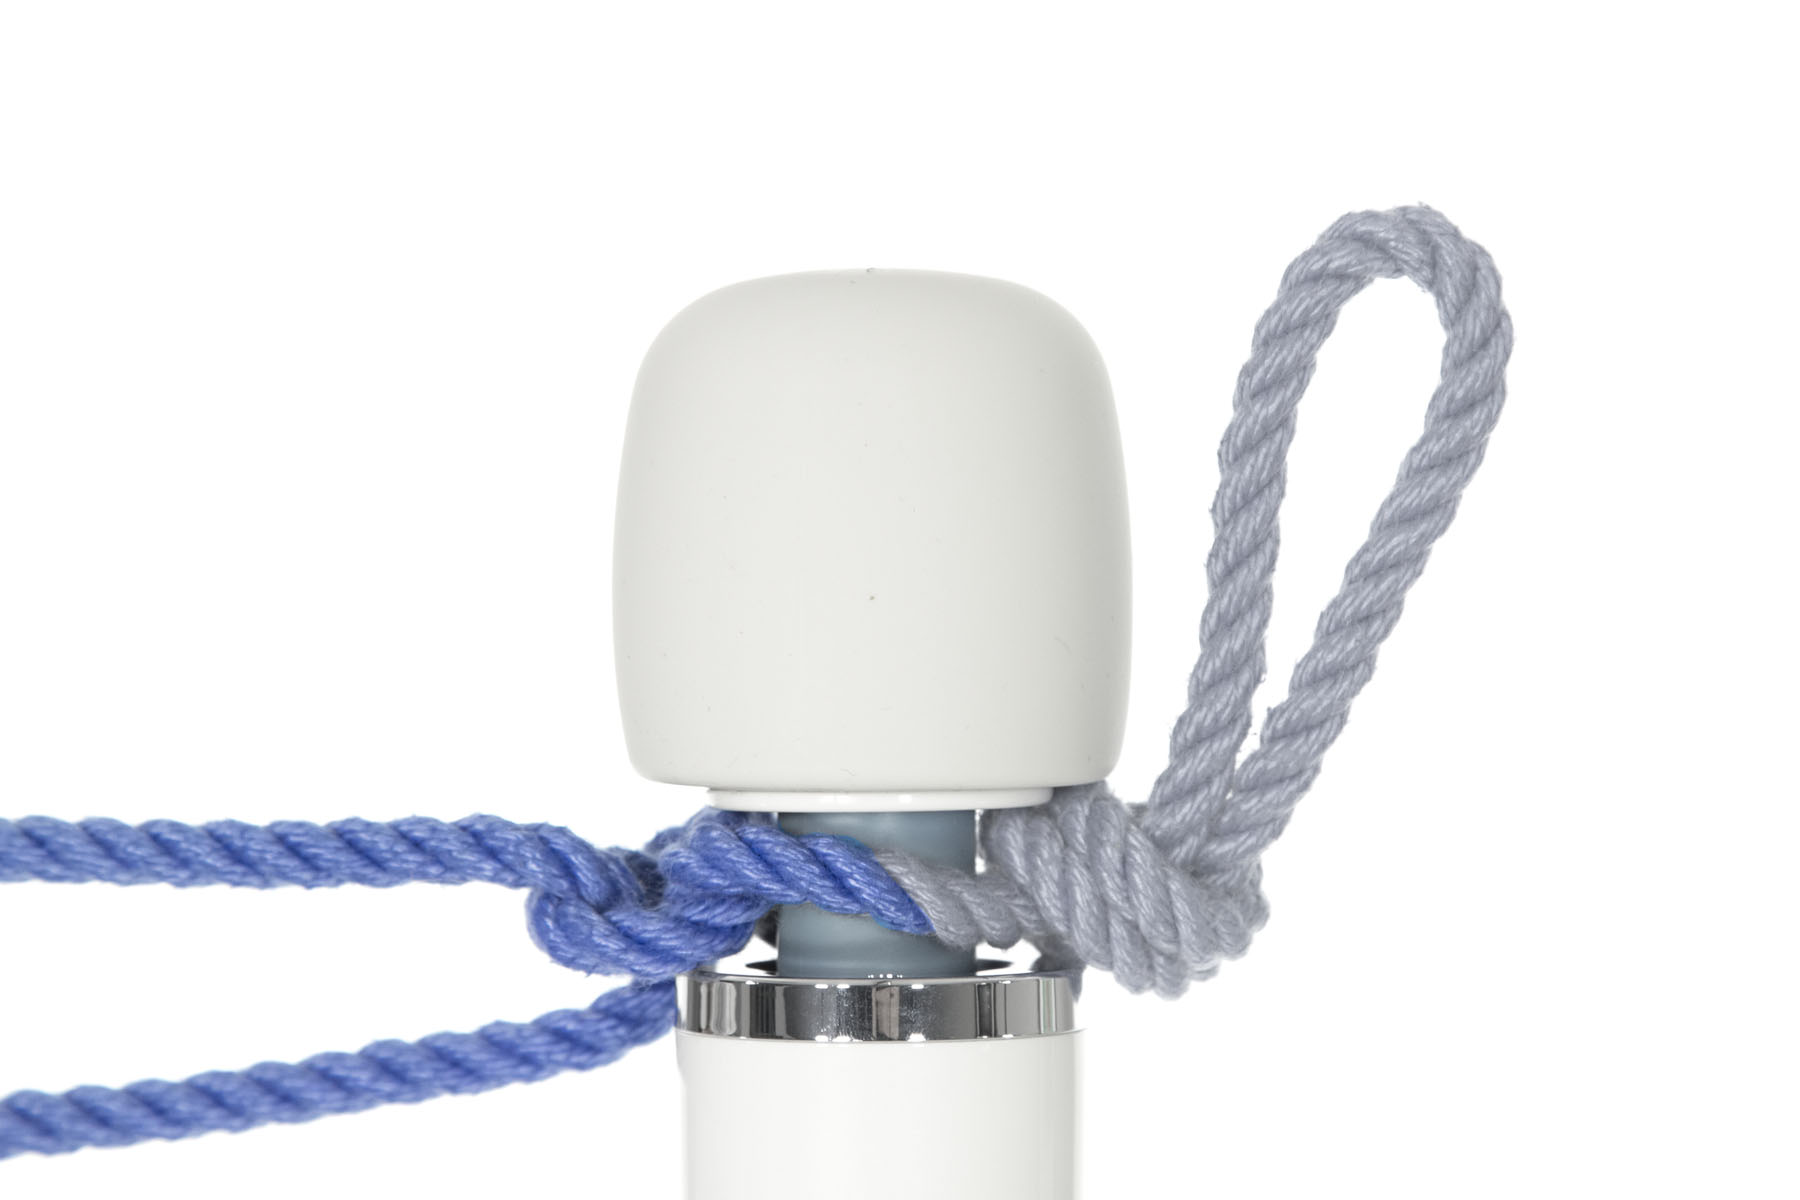 The base of the overhand knot is snug against the right side of the blue shaft of the vibrator. The ends of the rope are split, with one going around one side of the shaft and one going around the other side of the shaft. They meet on the left side of the shaft, where they are tied together with a square knot.